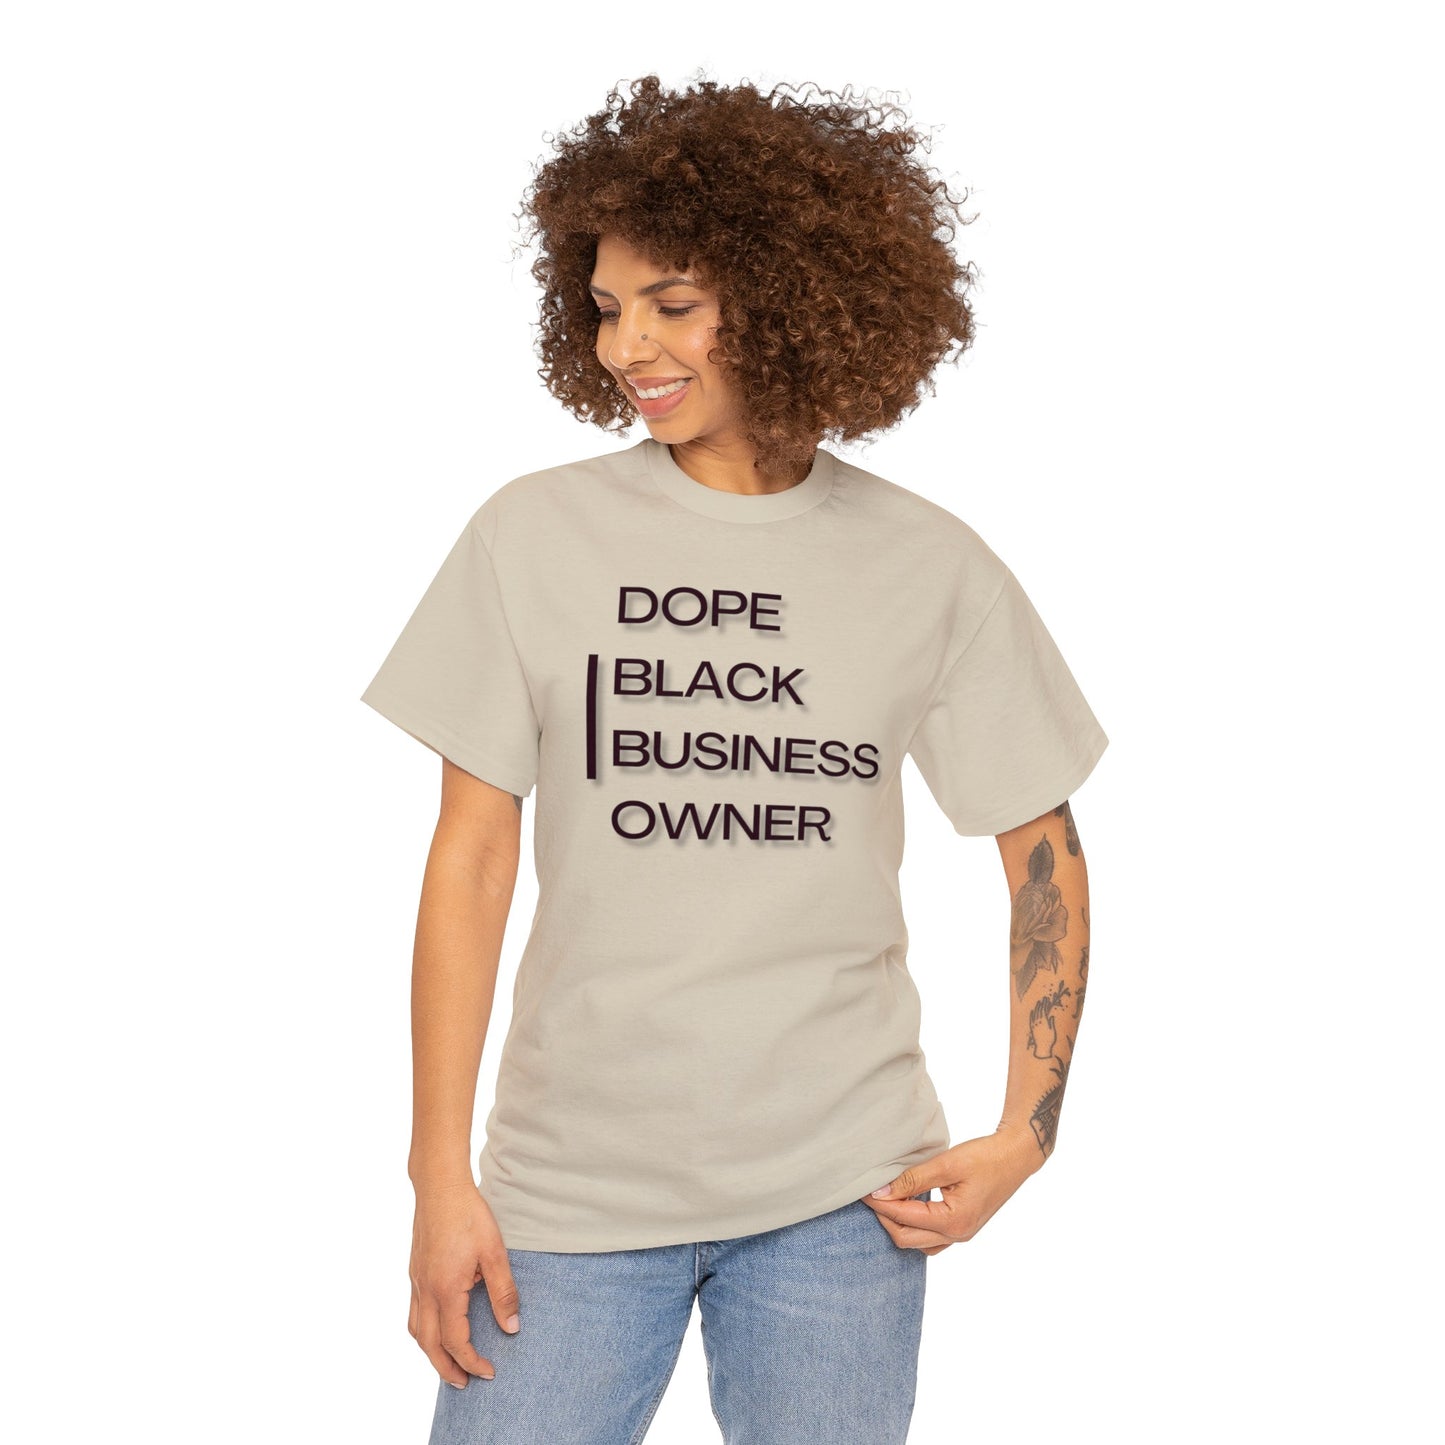 Dope Business Owner T-shirt